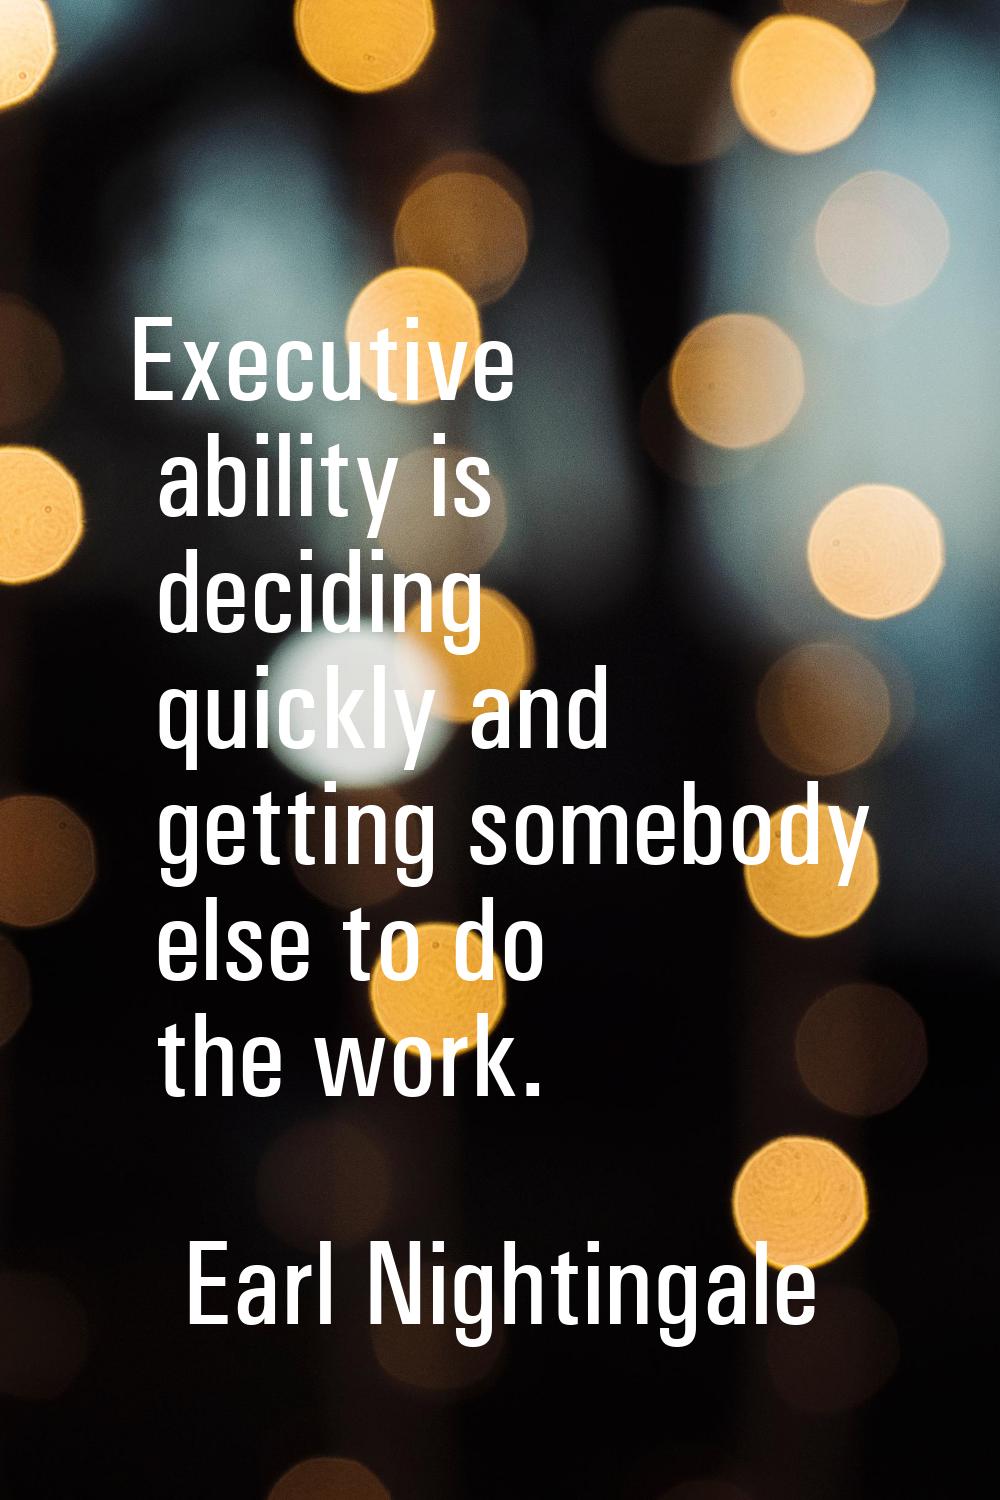 Executive ability is deciding quickly and getting somebody else to do the work.